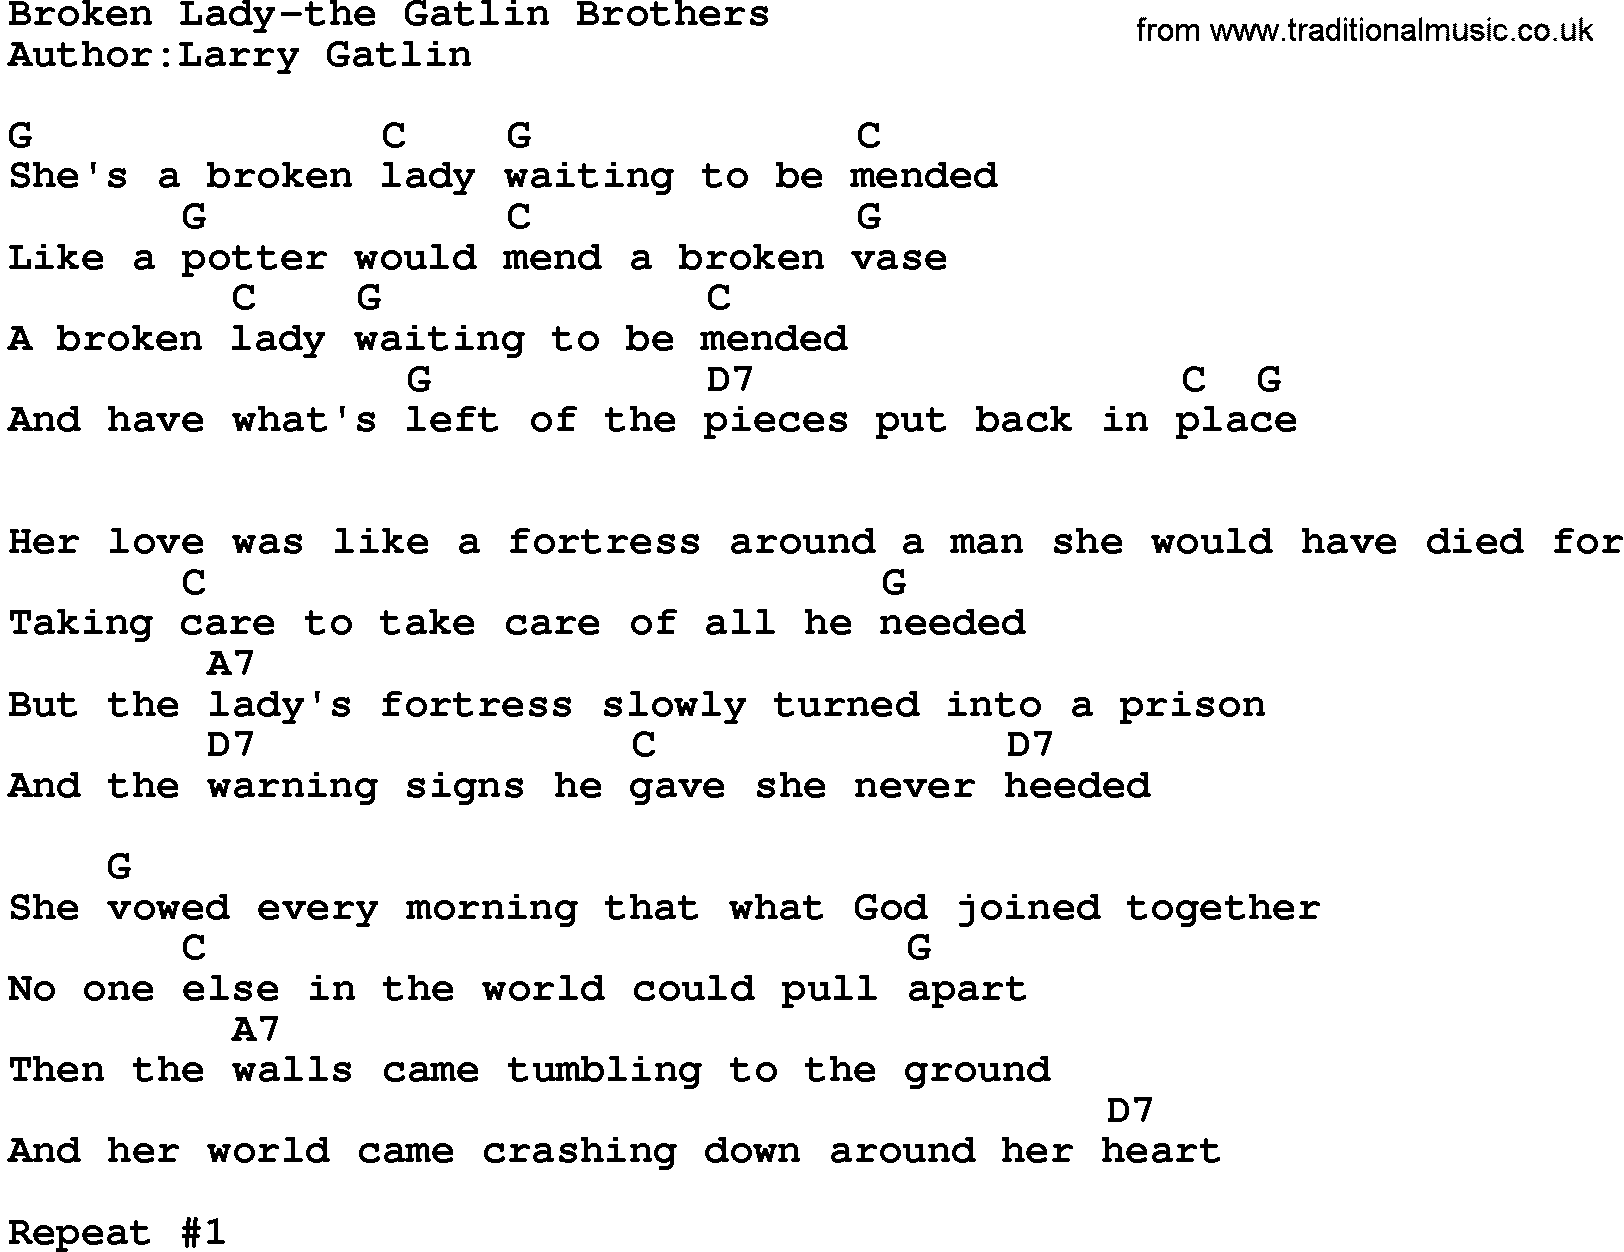 Country music song: Broken Lady-The Gatlin Brothers lyrics and chords